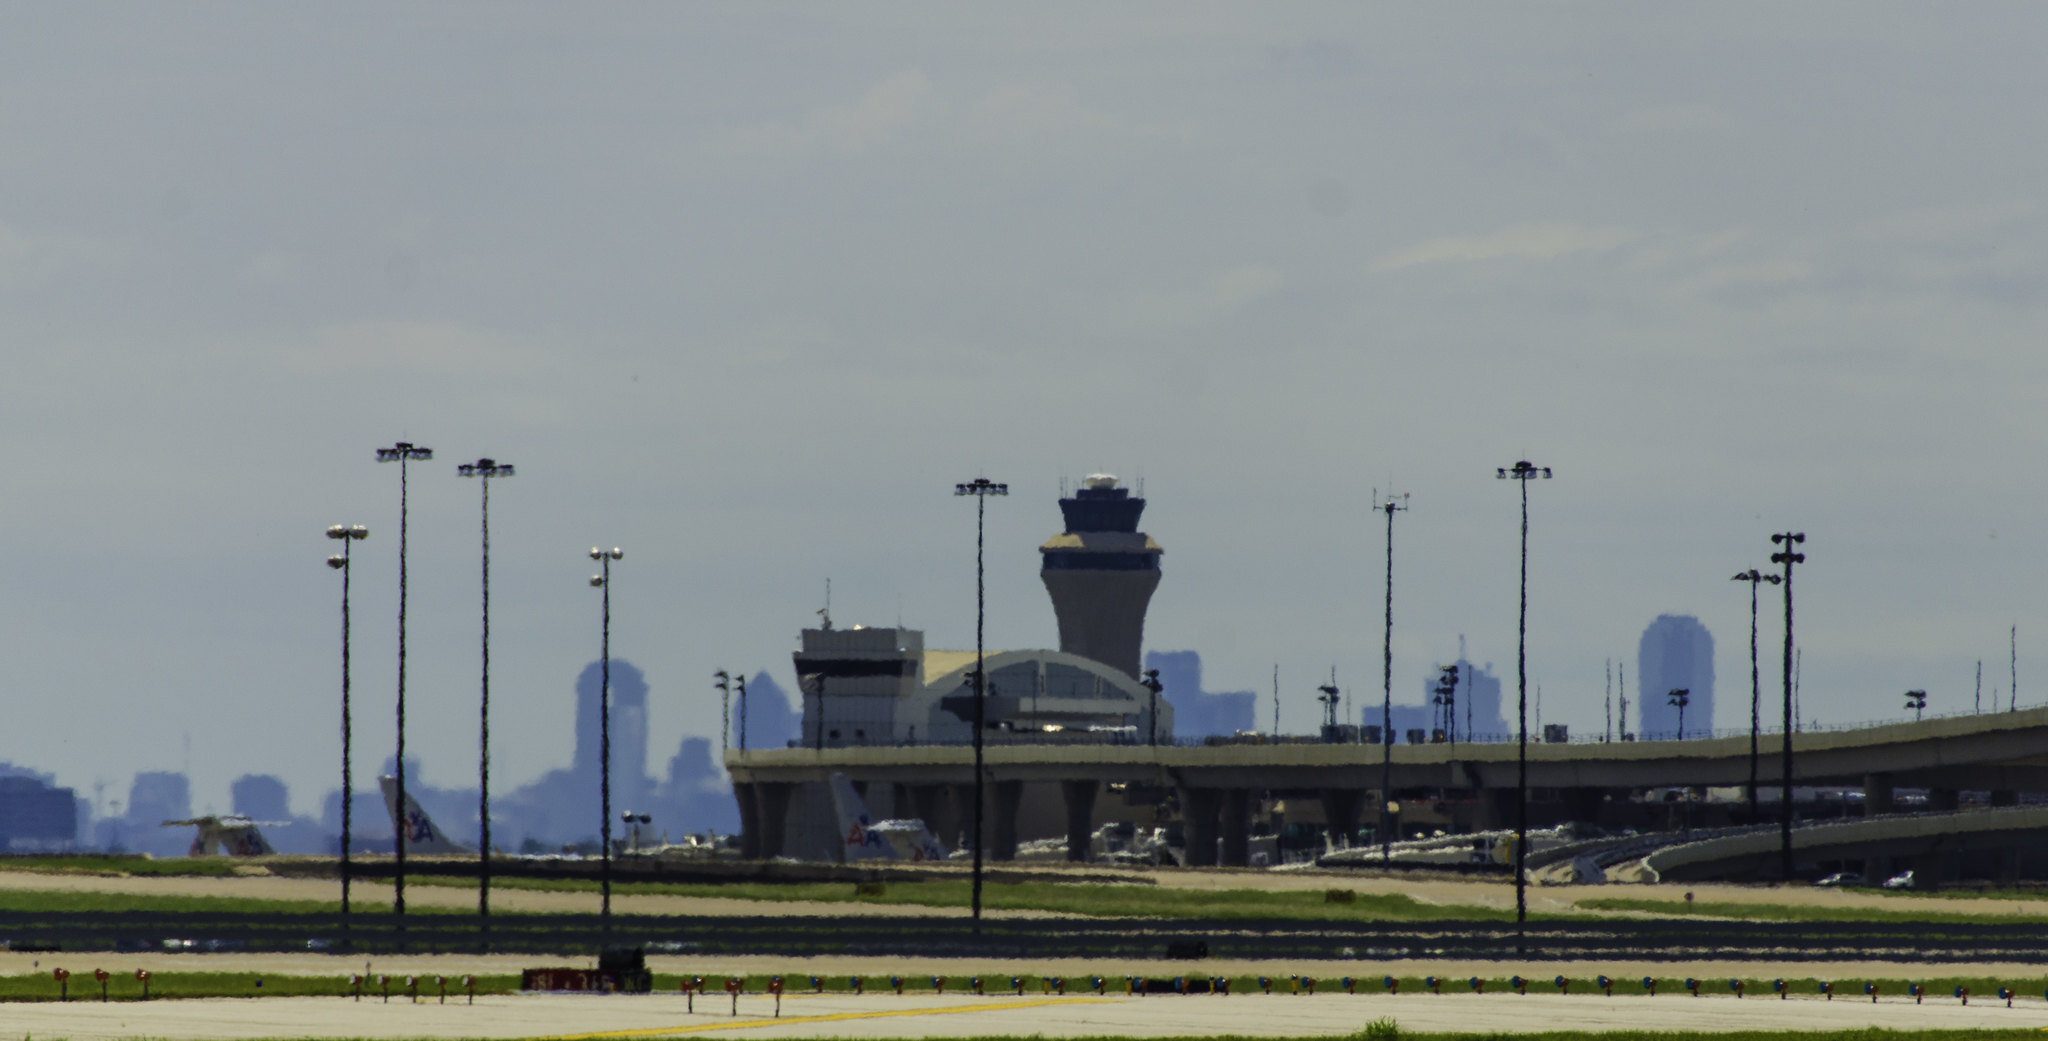 DFW airport tower and runways with the city skyline in the background